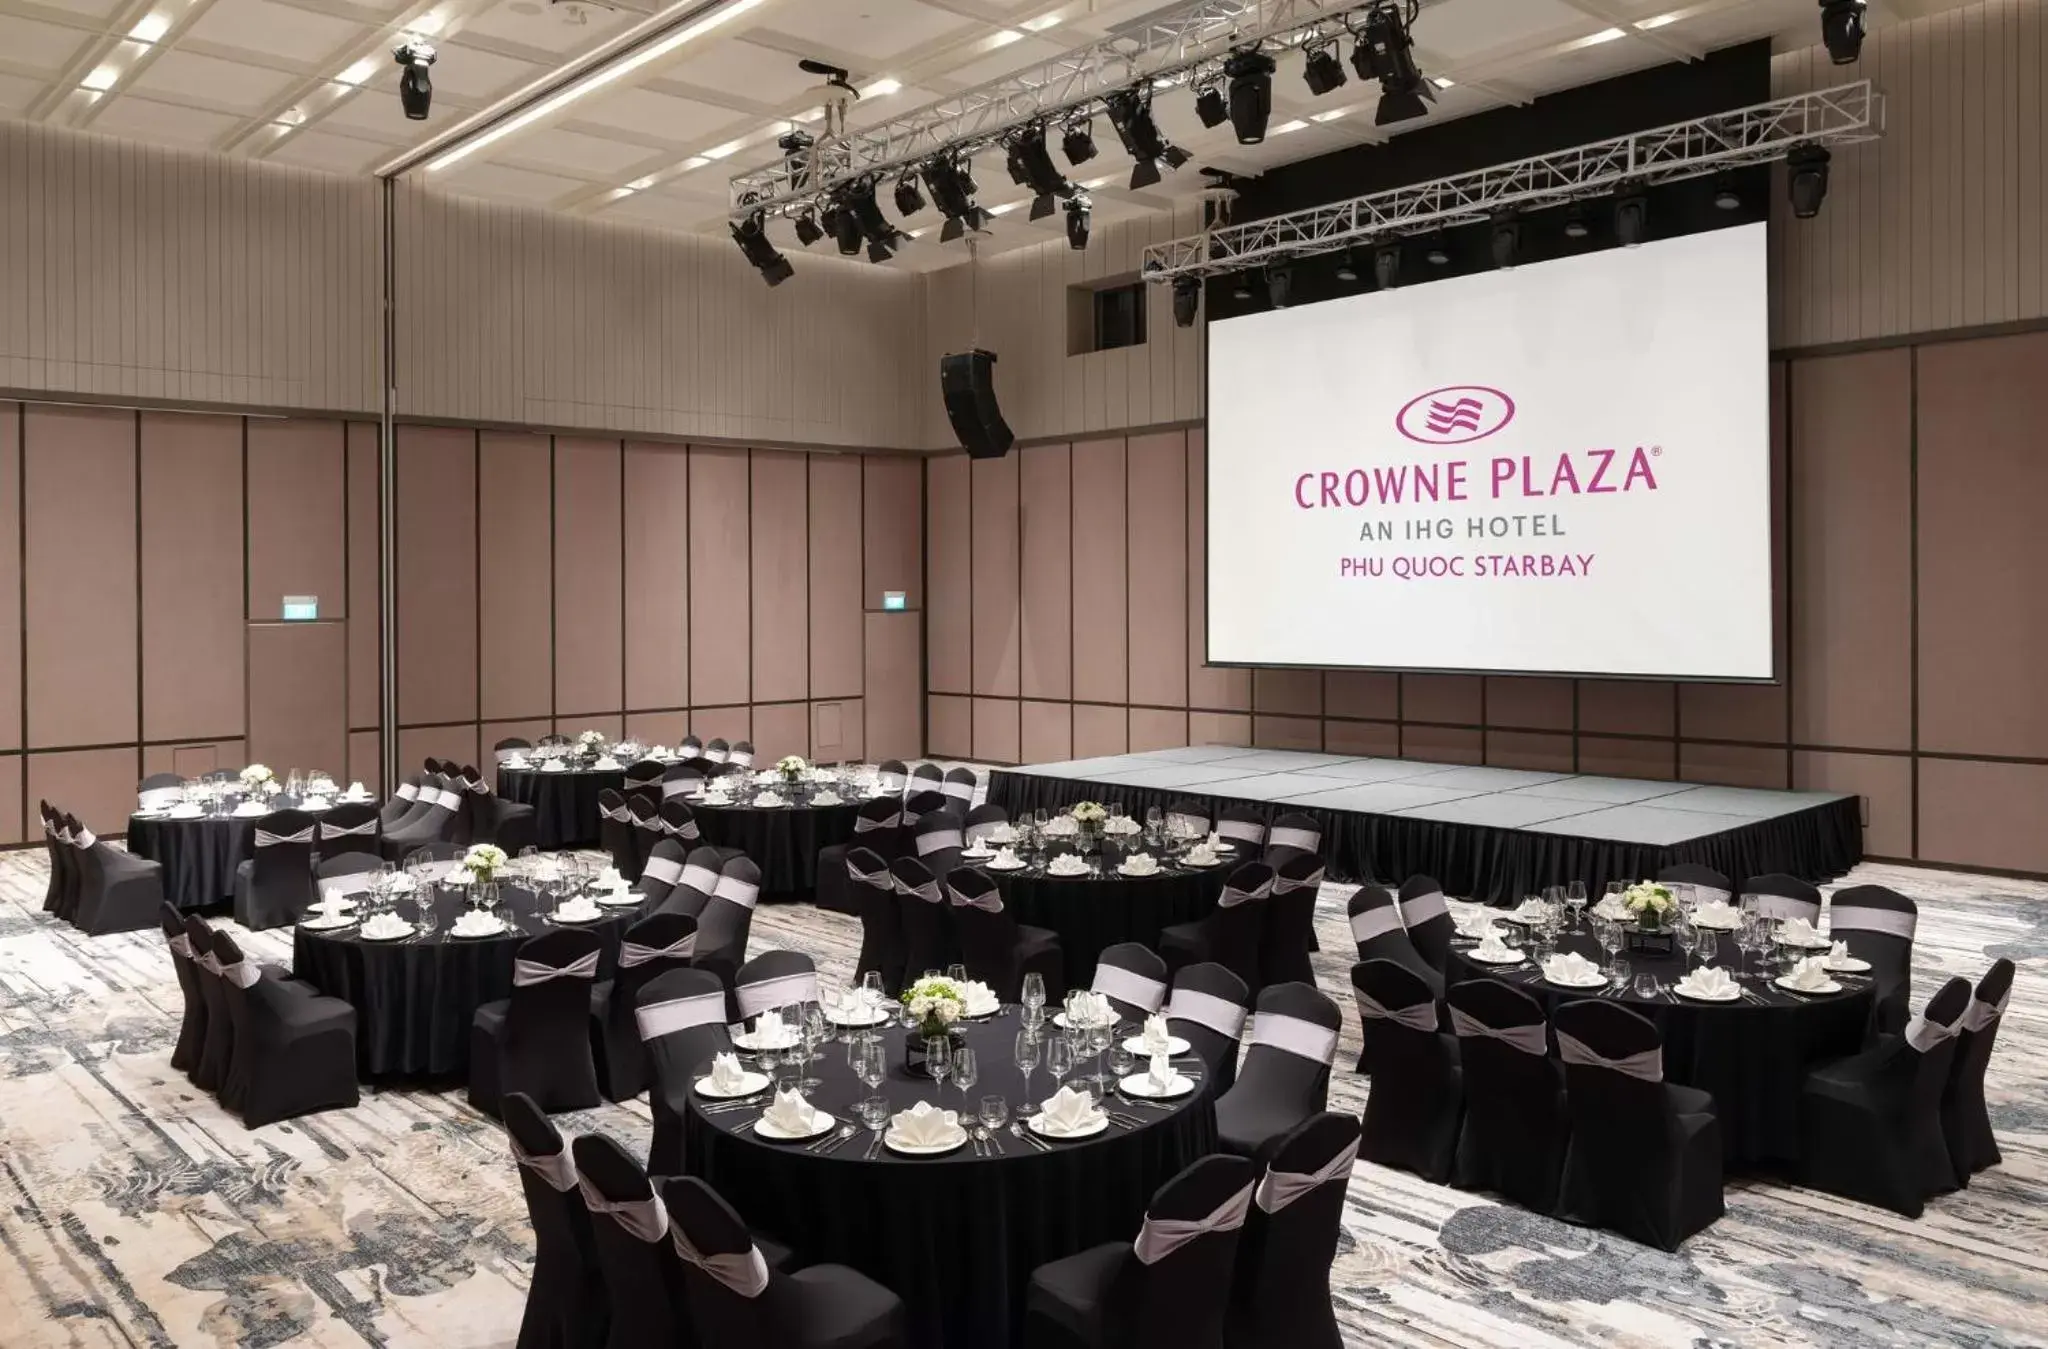 Banquet/Function facilities, Banquet Facilities in Crowne Plaza Phu Quoc Starbay, an IHG Hotel